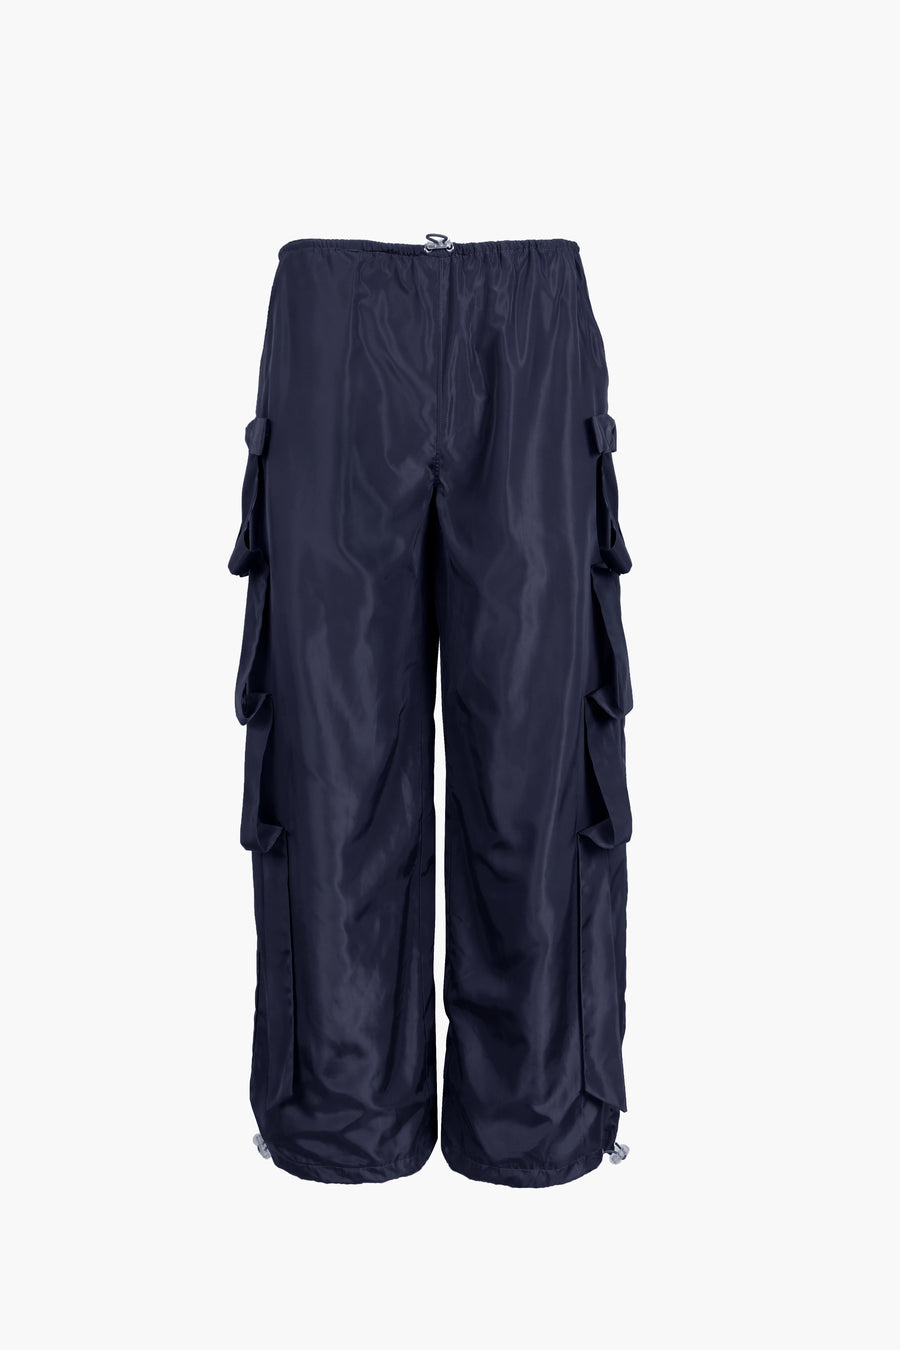 Trackpant in navy with tacked bow detail at sides